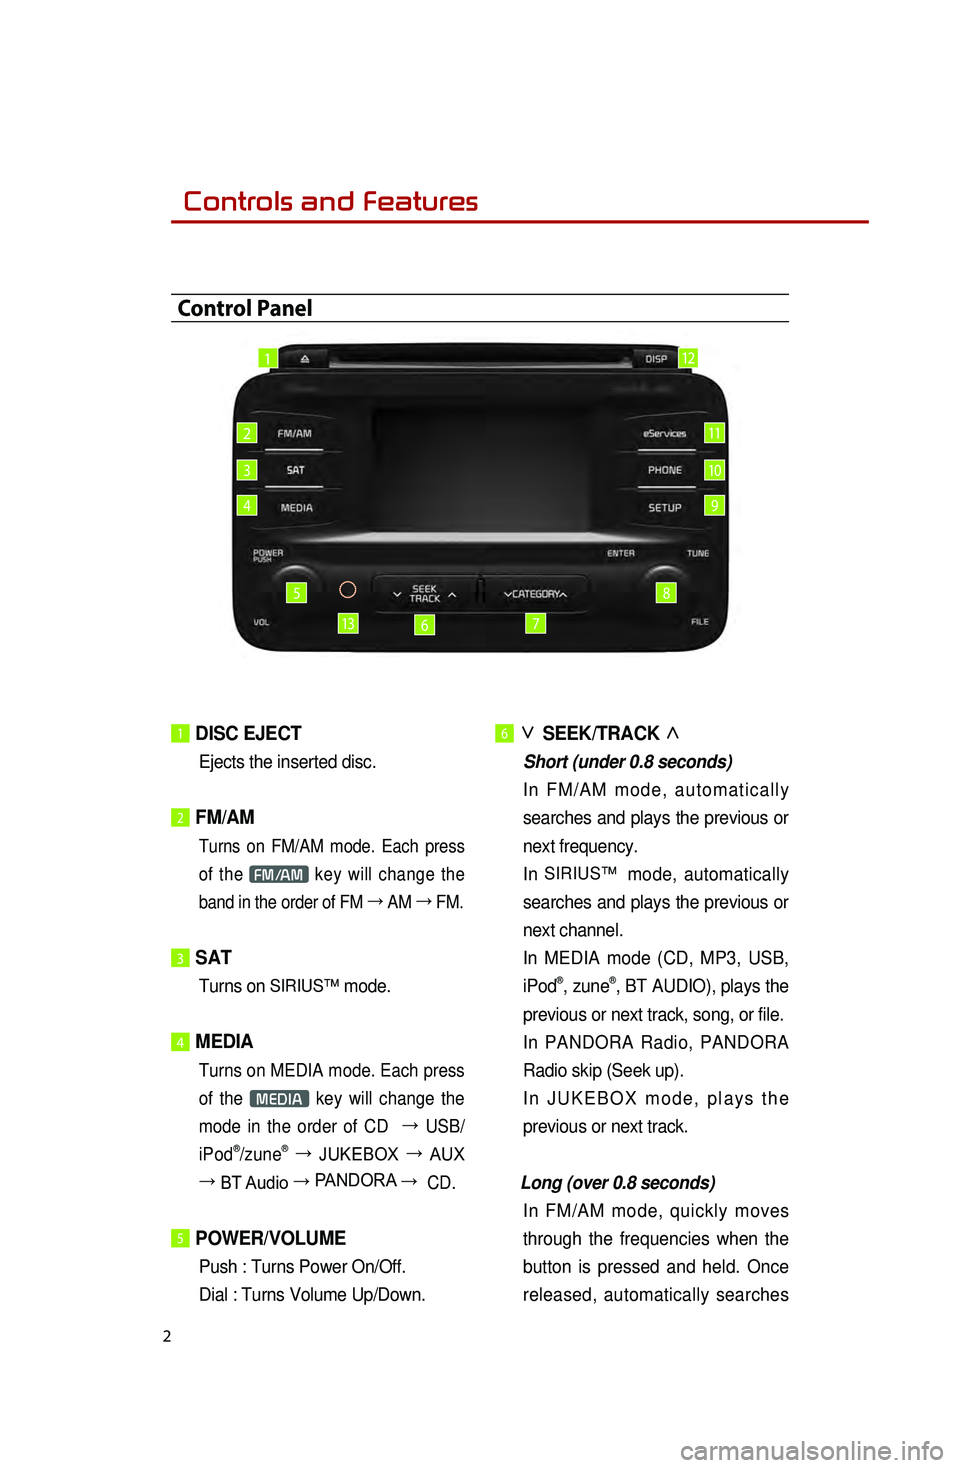 KIA OPTIMA HYBRID 2014  Quick Reference Guide 2
1 DISC  EJECT
Ejects the inserted disc.
 
2 FM/AM
 Turns on FM/AM mode. Each press 
of the 
FM/AM key will change the 
band in the order of FM  →
 AM  →
 FM.
3 SAT
Turns on SIRIUS™  mode. 
4 M